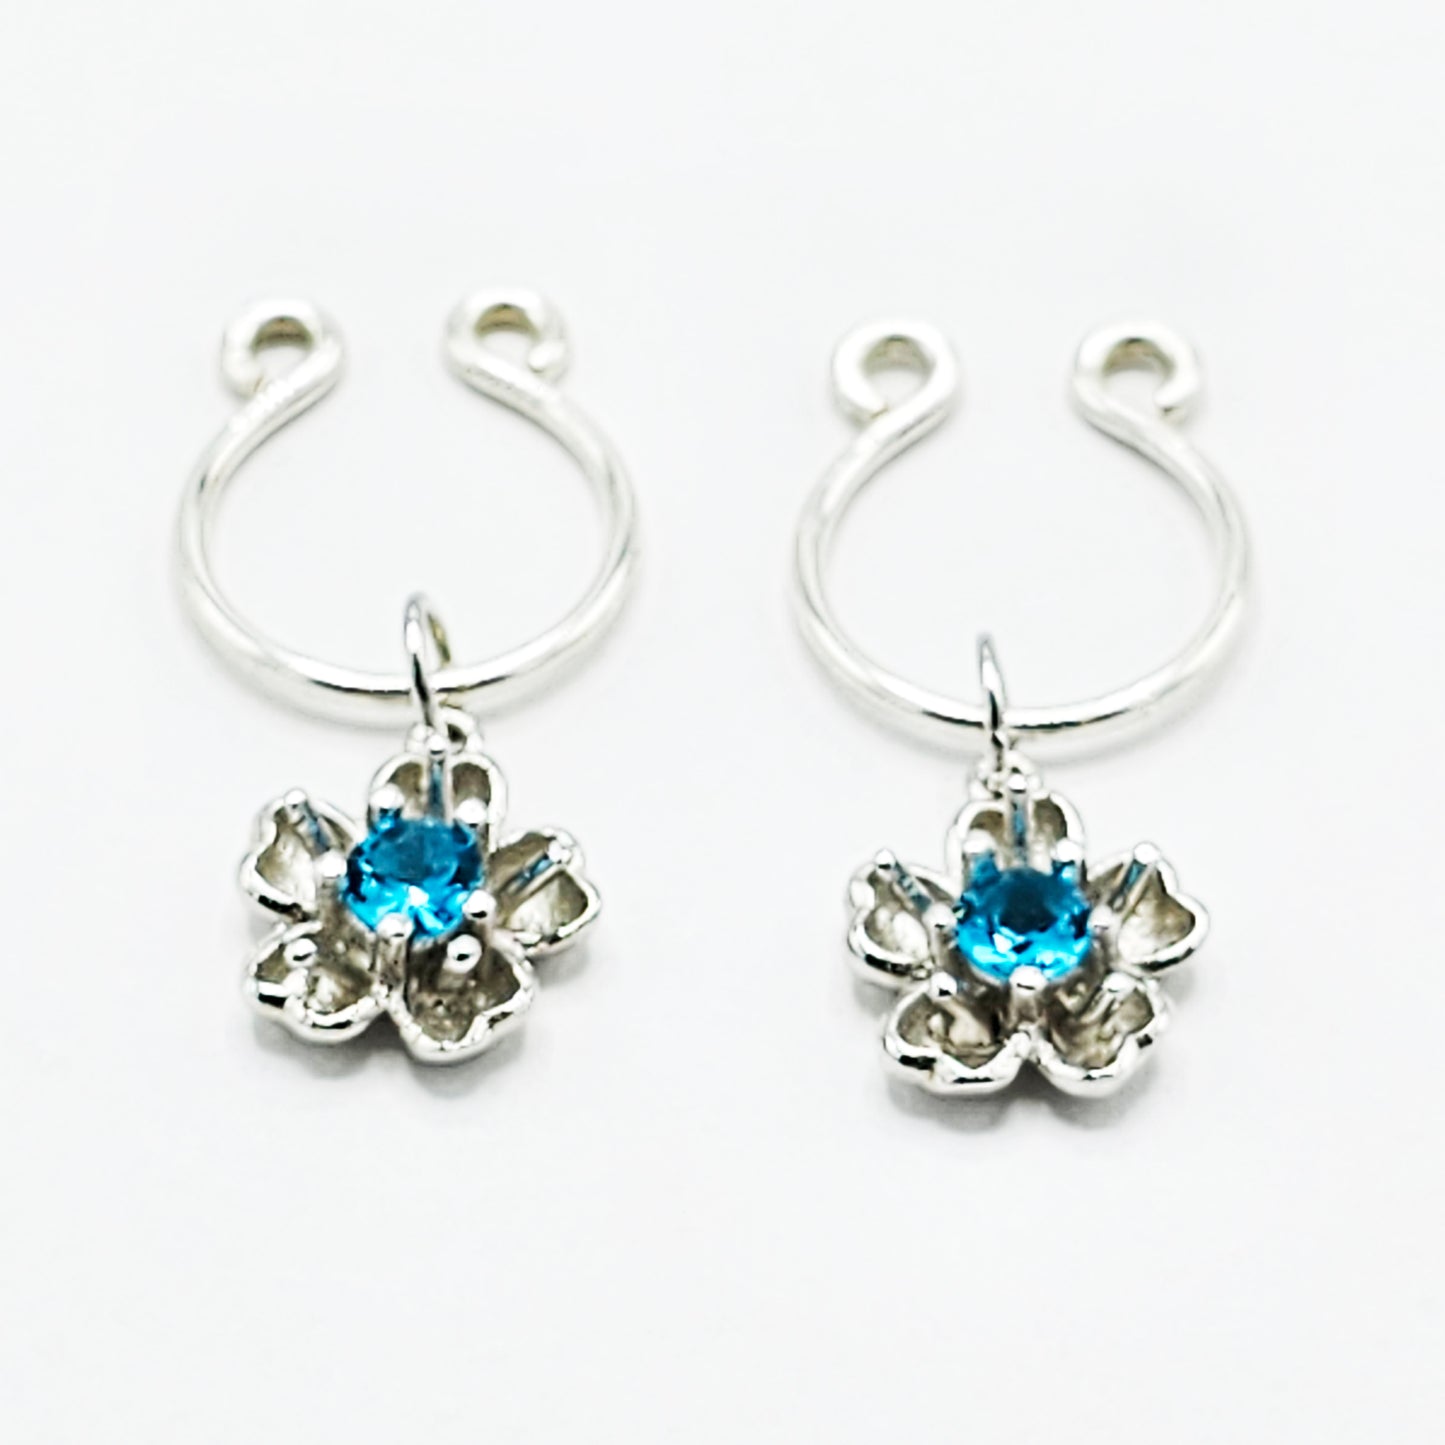 Non Piercing Nipples Jewelry, Sterling Silver Flower Nipple Rings. Sexy Nipple Rings with Blue Gem Flowers.